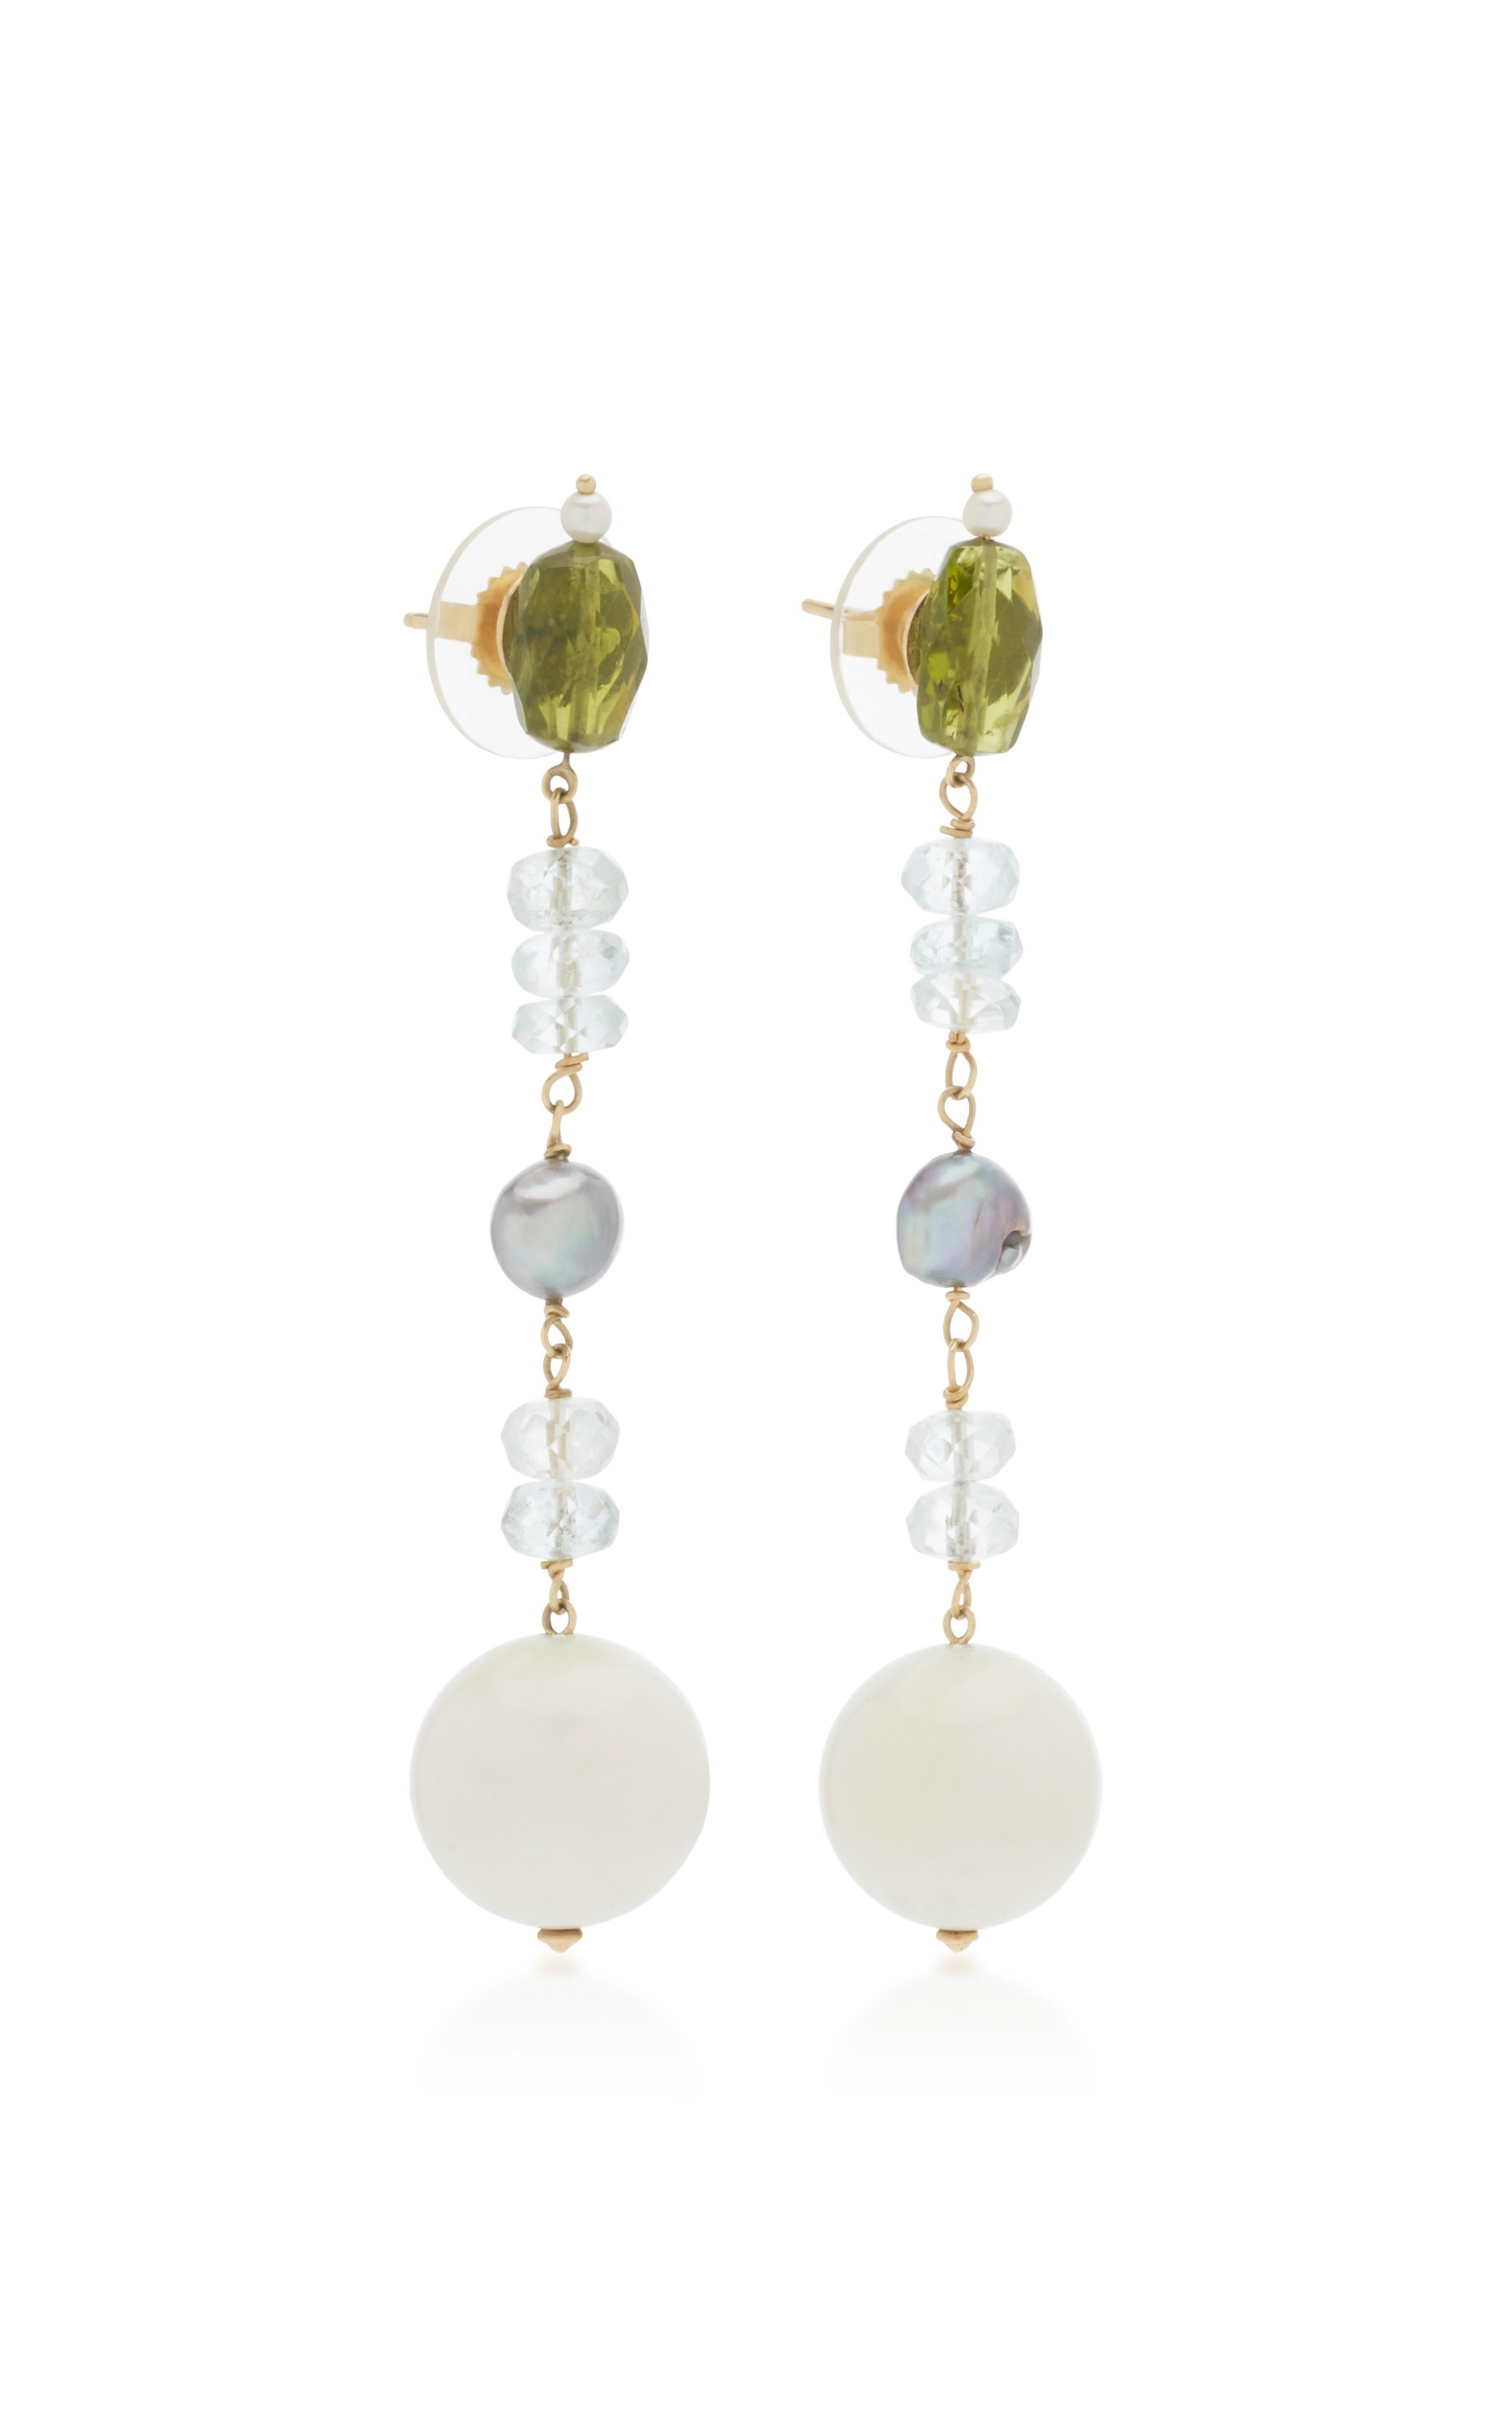 A pair of faceted Peridot Earring with pearl top and posts with a faceted aqua bead chain & gray pearl accent & a round Kocholong bead dangle. Set in 18 karat yellow gold, signed Sorab & Roshi.
Pe=8 cts., Aq= 8 cts.
3